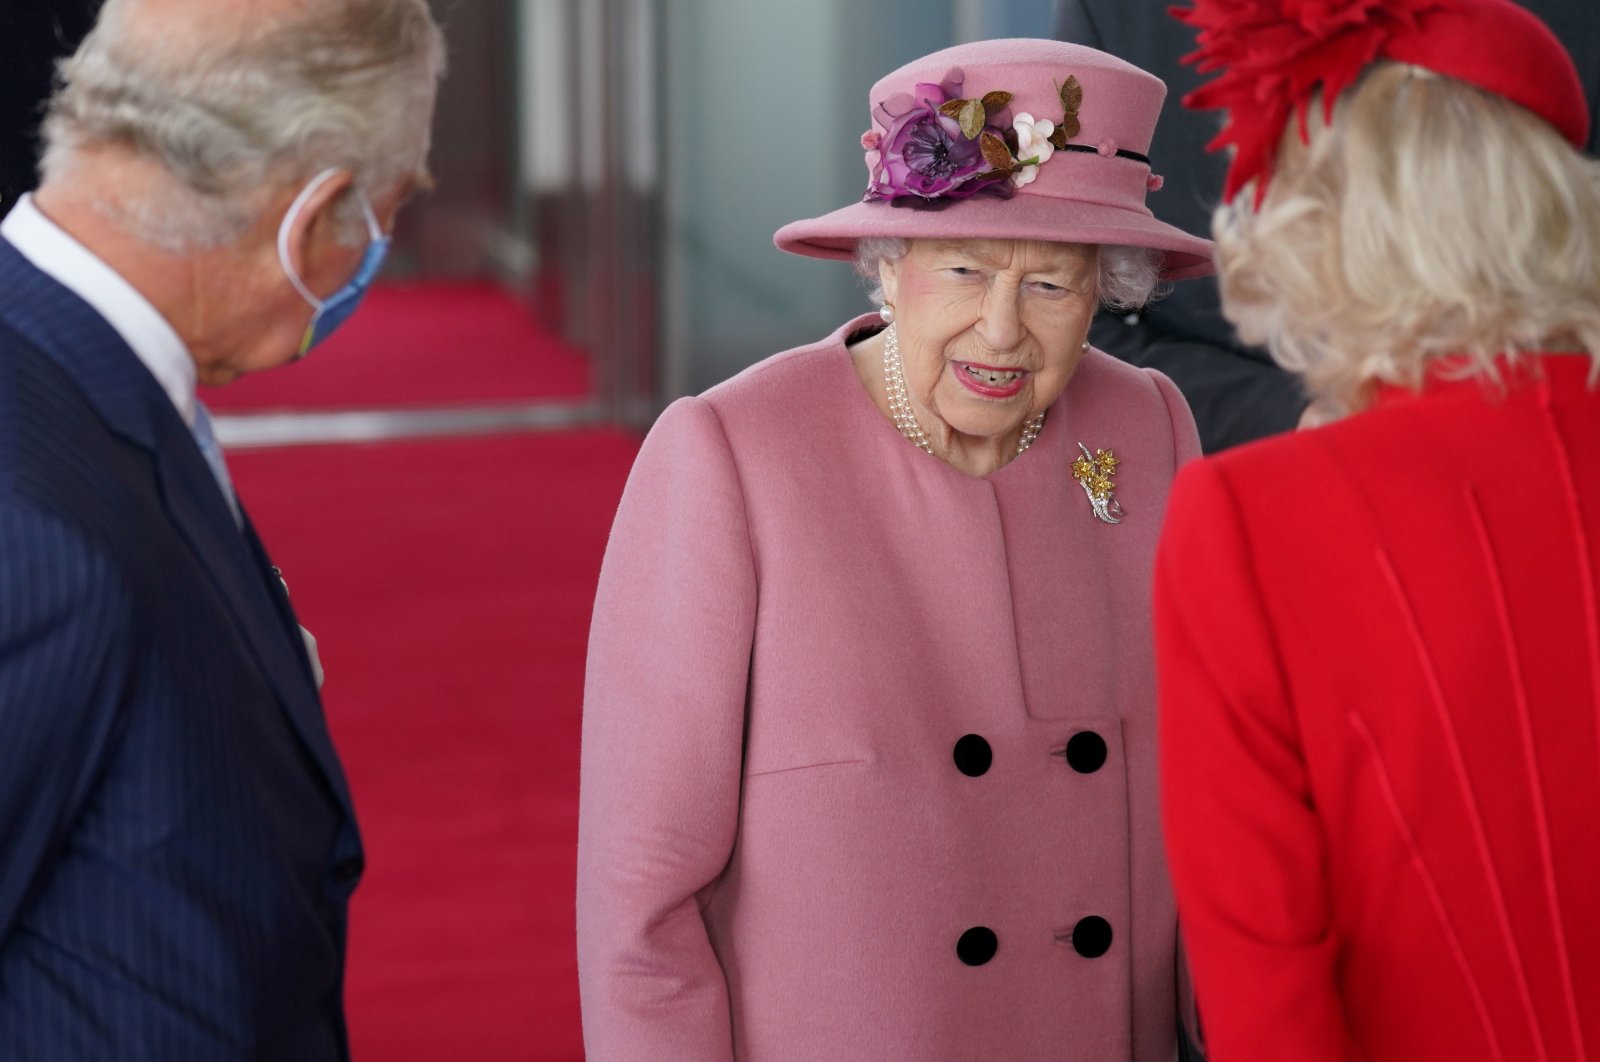 Britain's Queen Elizabeth, accompanied by Prince Charles and Camilla, Duchess of Cornwall, attends the opening ceremony of the sixth session of the Senedd in Cardiff, Britain, Oct. 14, 2021. (REUTERS Photo)